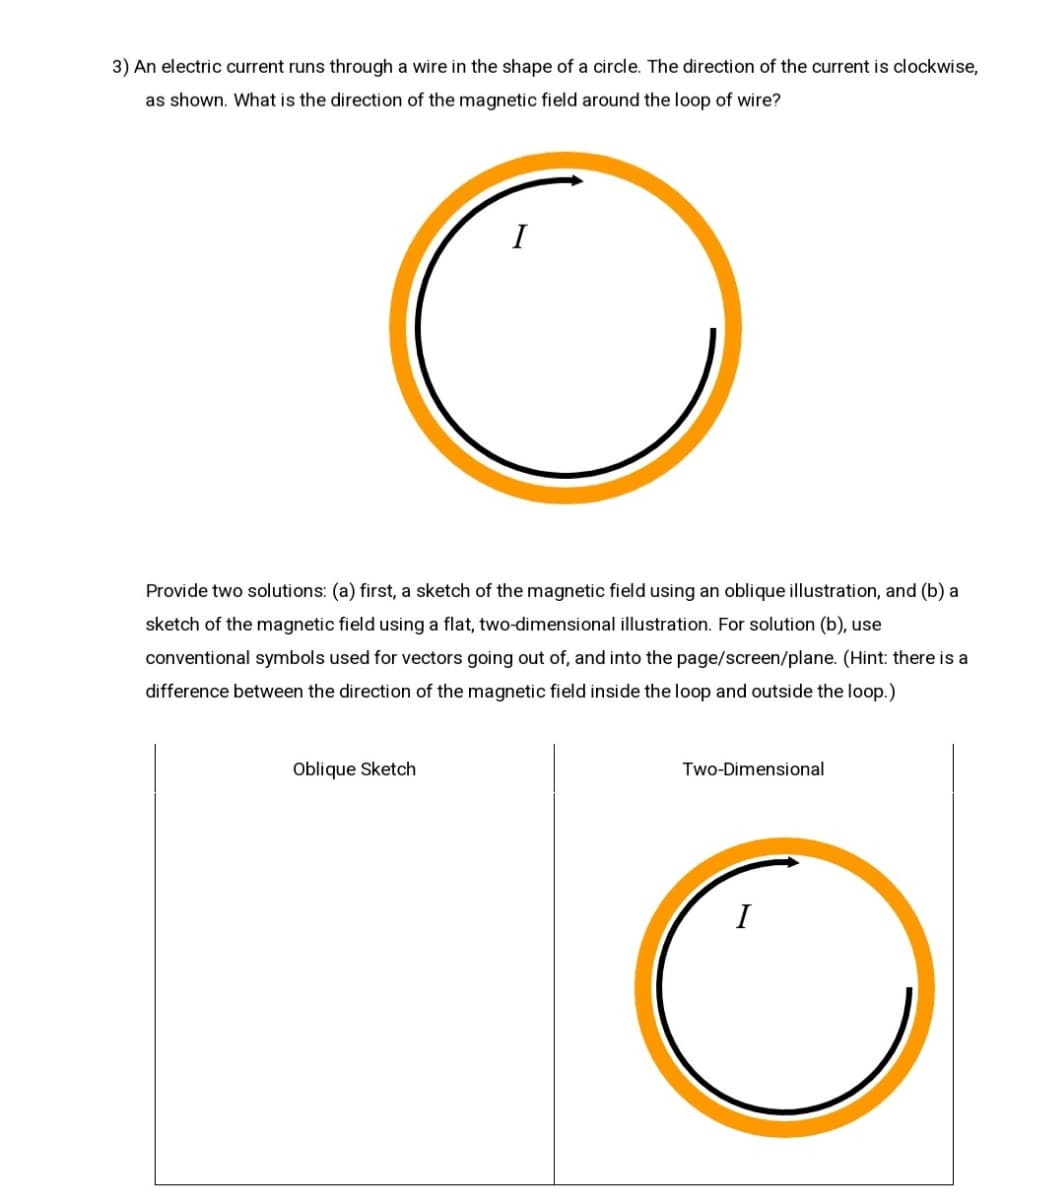 3) An electric current runs through a wire in the shape of a circle. The direction of the current is clockwise,
as shown. What is the direction of the magnetic field around the loop of wire?
I
Provide two solutions: (a) first, a sketch of the magnetic field using an oblique illustration, and (b) a
sketch of the magnetic field using a flat, two-dimensional illustration. For solution (b), use
conventional symbols used for vectors going out of, and into the page/screen/plane. (Hint: there is a
difference between the direction of the magnetic field inside the loop and outside the loop.)
Oblique Sketch
Two-Dimensional
I
